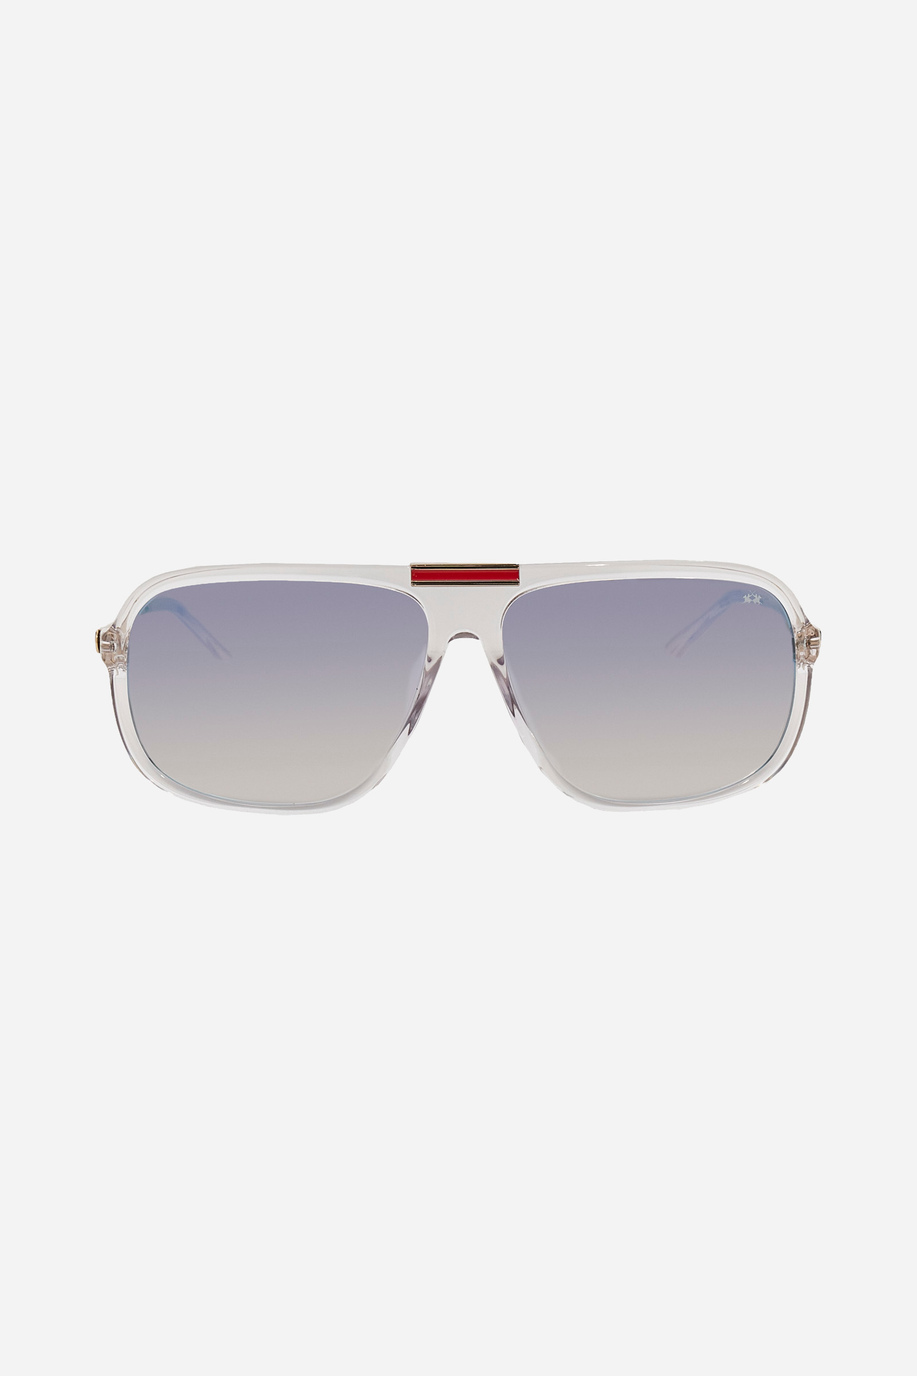 Metal sunglasses - Small gifts for him | La Martina - Official Online Shop